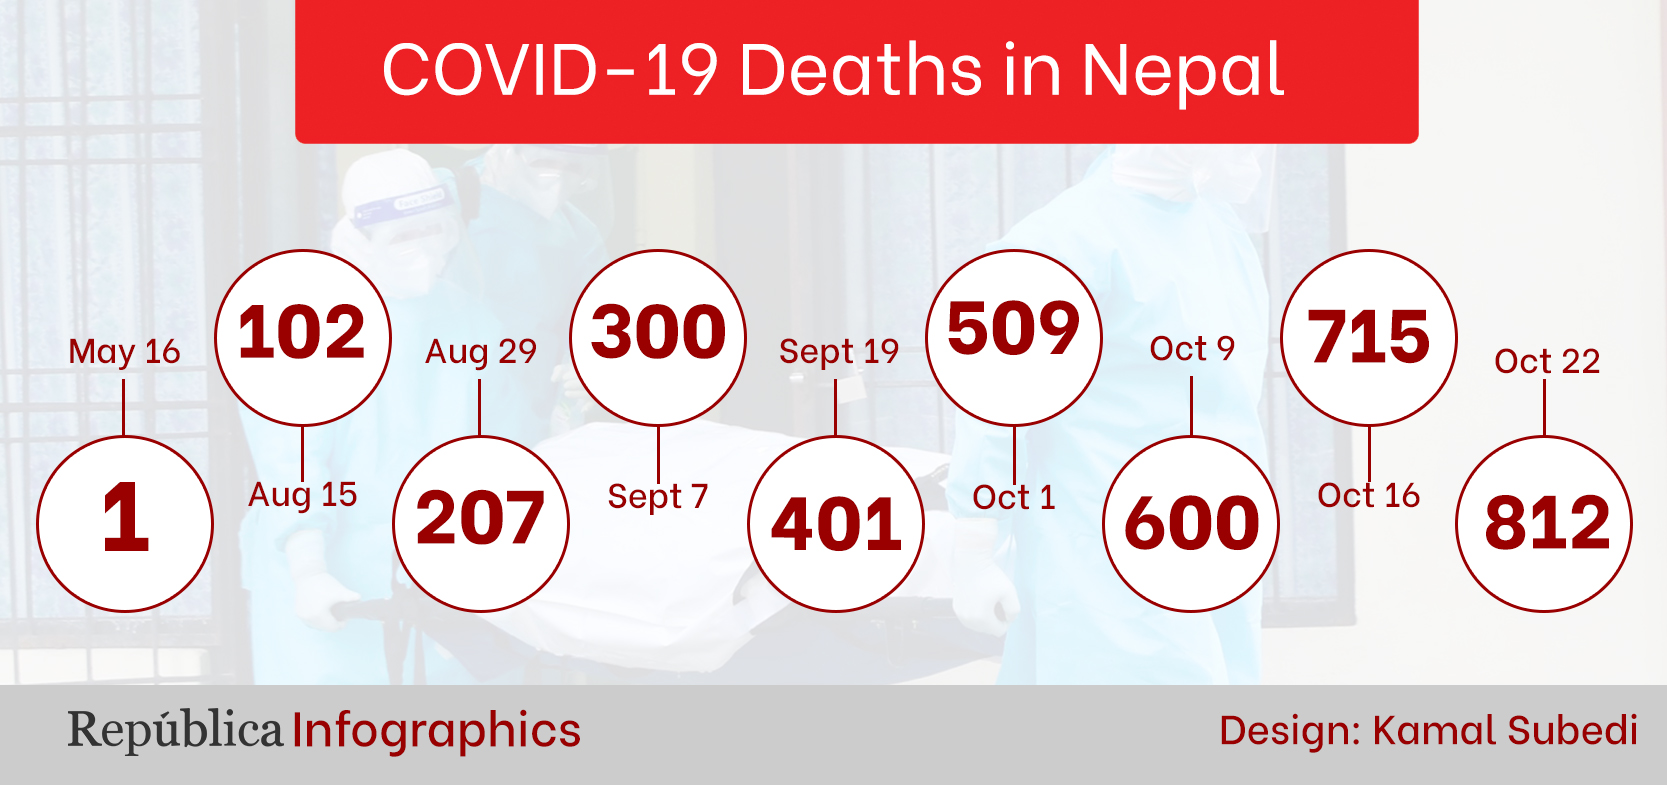 With more than 100 people dying of COVID-19 in six days, Nepal’s COVID-19 death tally goes past 800